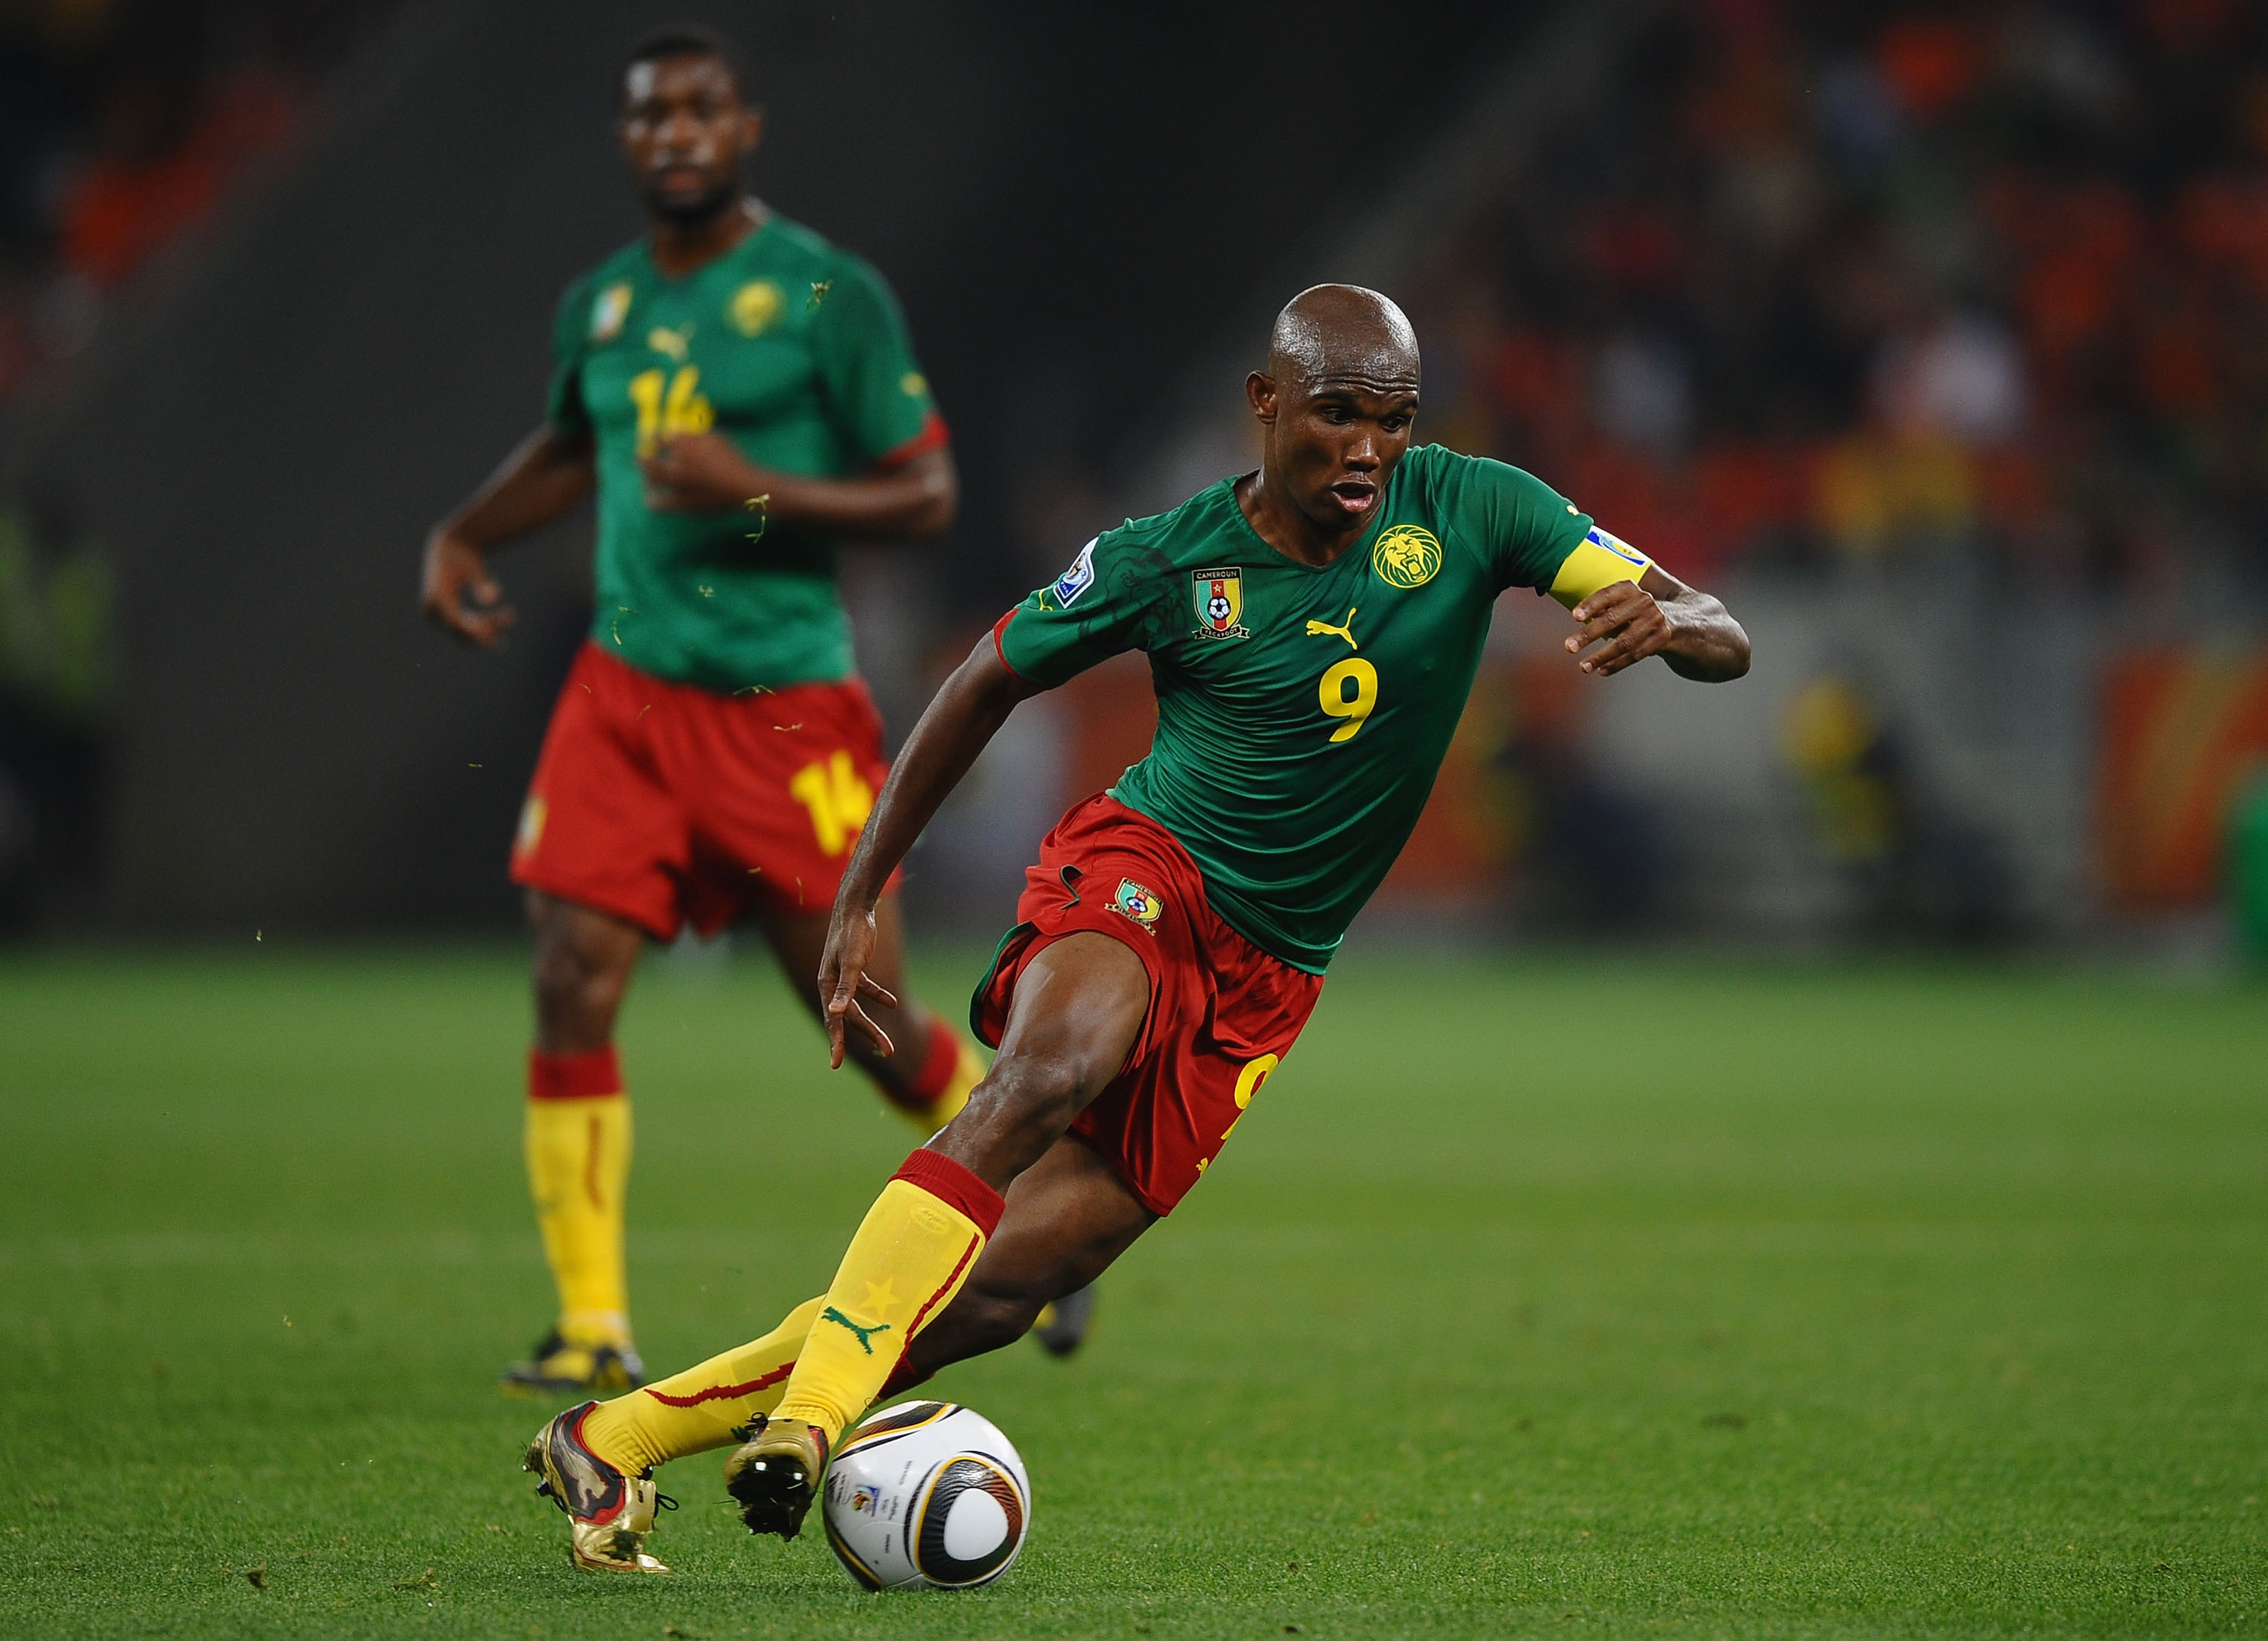 CAPE TOWN, SOUTH AFRICA - JUNE 24:  Samuel Eto'o of Cameroon runs with the ball during the 2010 FIFA World Cup South Africa Group E match between Cameroon and Netherlands at Green Point Stadium on June 24, 2010 in Cape Town, South Africa.  (Photo by Laure